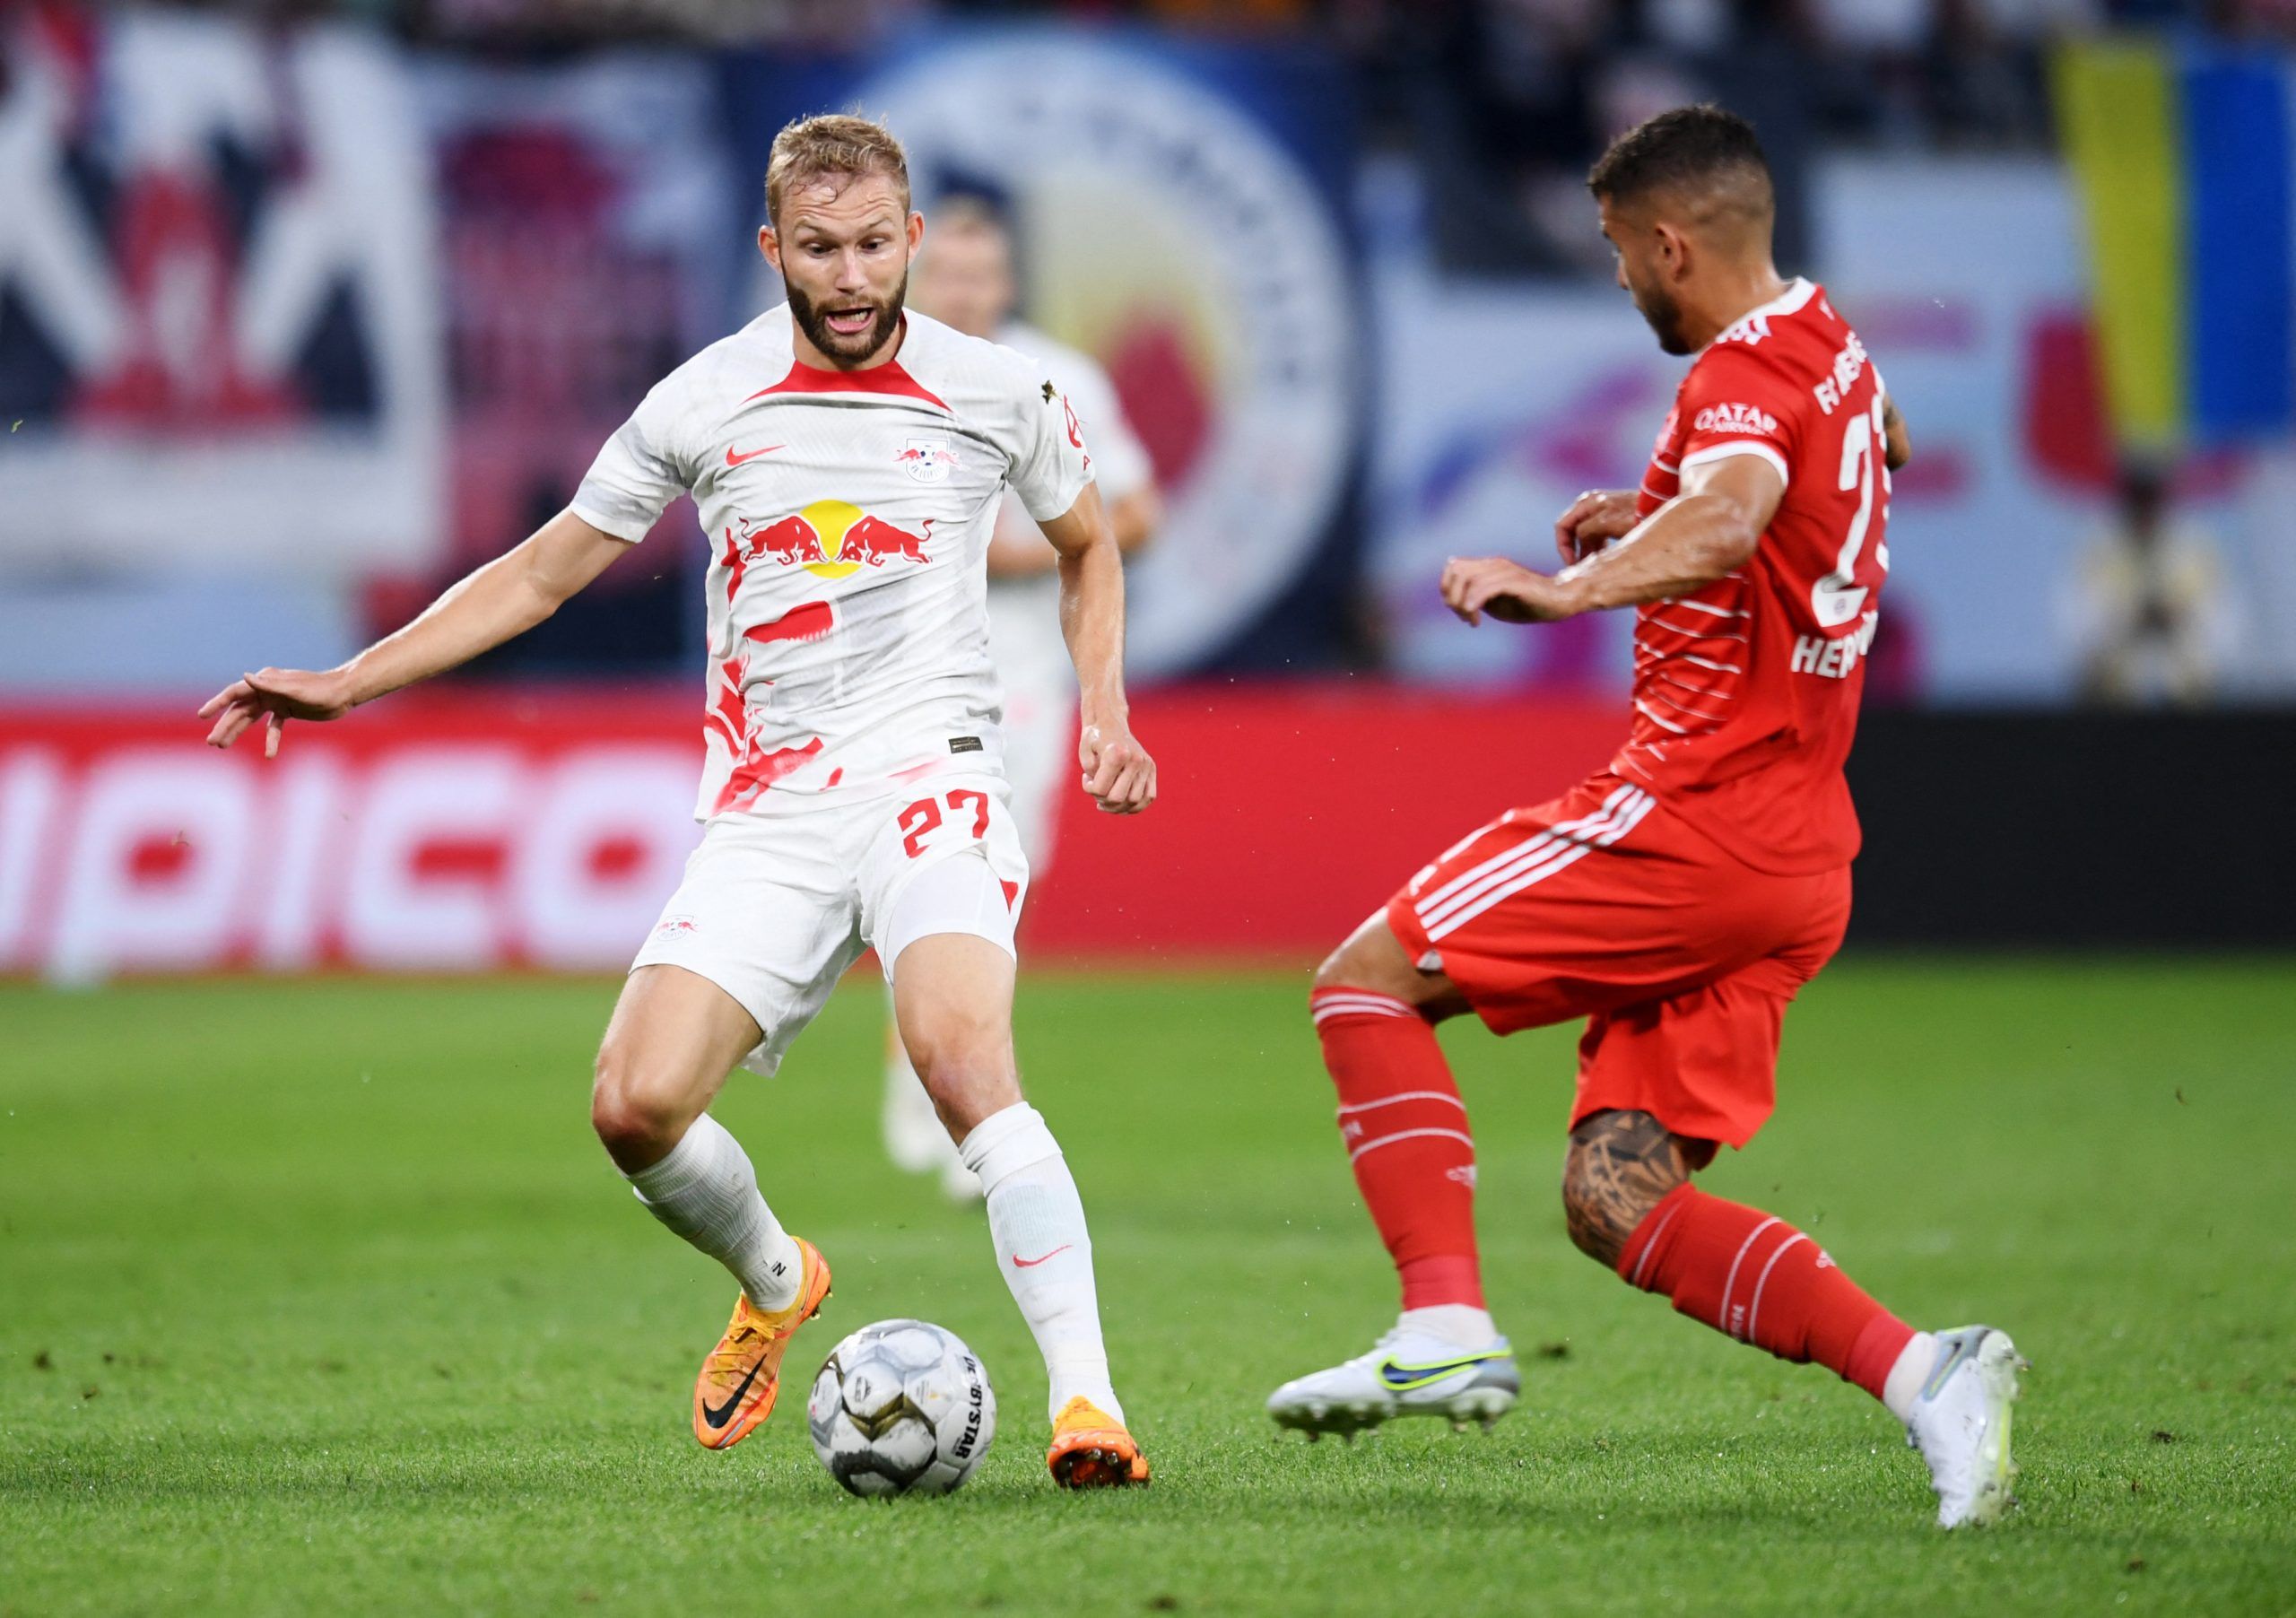 Soccer Football - DFL Super Cup - RB Leipzig v Bayern Munich - Red Bull Arena, Leipzig, Germany - July 30, 2022  RB Leipzig's Konrad Laimer in action with Bayern Munich's Lucas Hernandez REUTERS/Annegret Hilse DFL REGULATIONS PROHIBIT ANY USE OF PHOTOGRAPHS AS IMAGE SEQUENCES AND/OR QUASI-VIDEO.